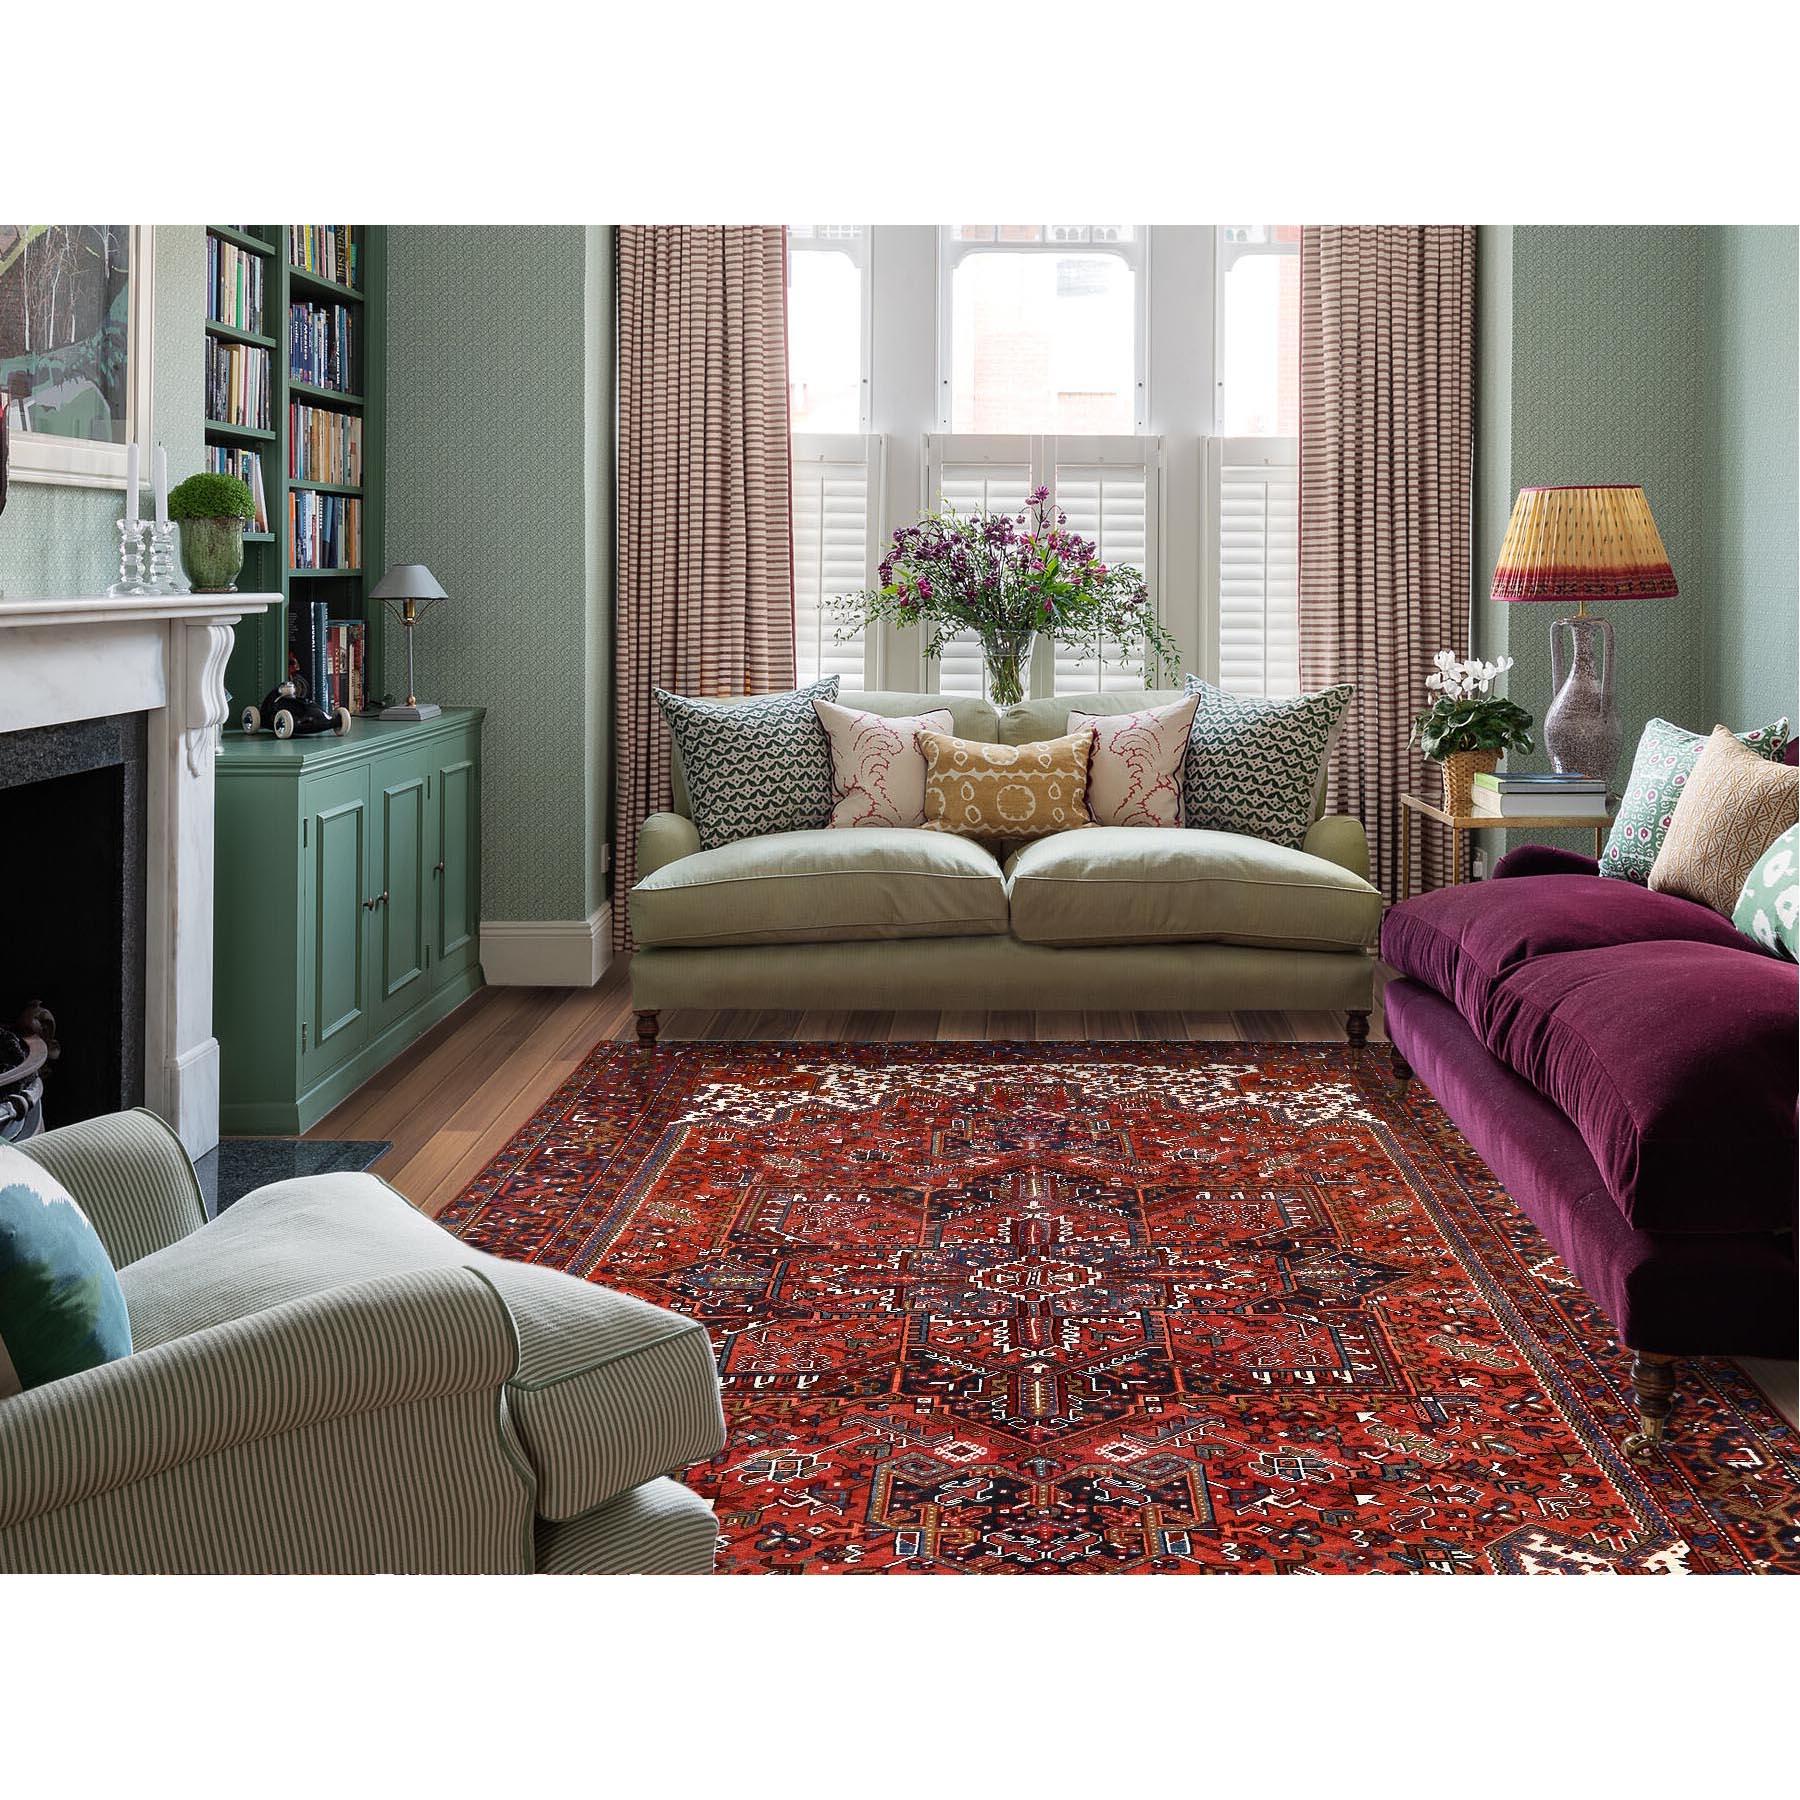 This fabulous Hand-Knotted carpet has been created and designed for extra strength and durability. This rug has been handcrafted for weeks in the traditional method that is used to make
Exact Rug Size in Feet and Inches : 9'10